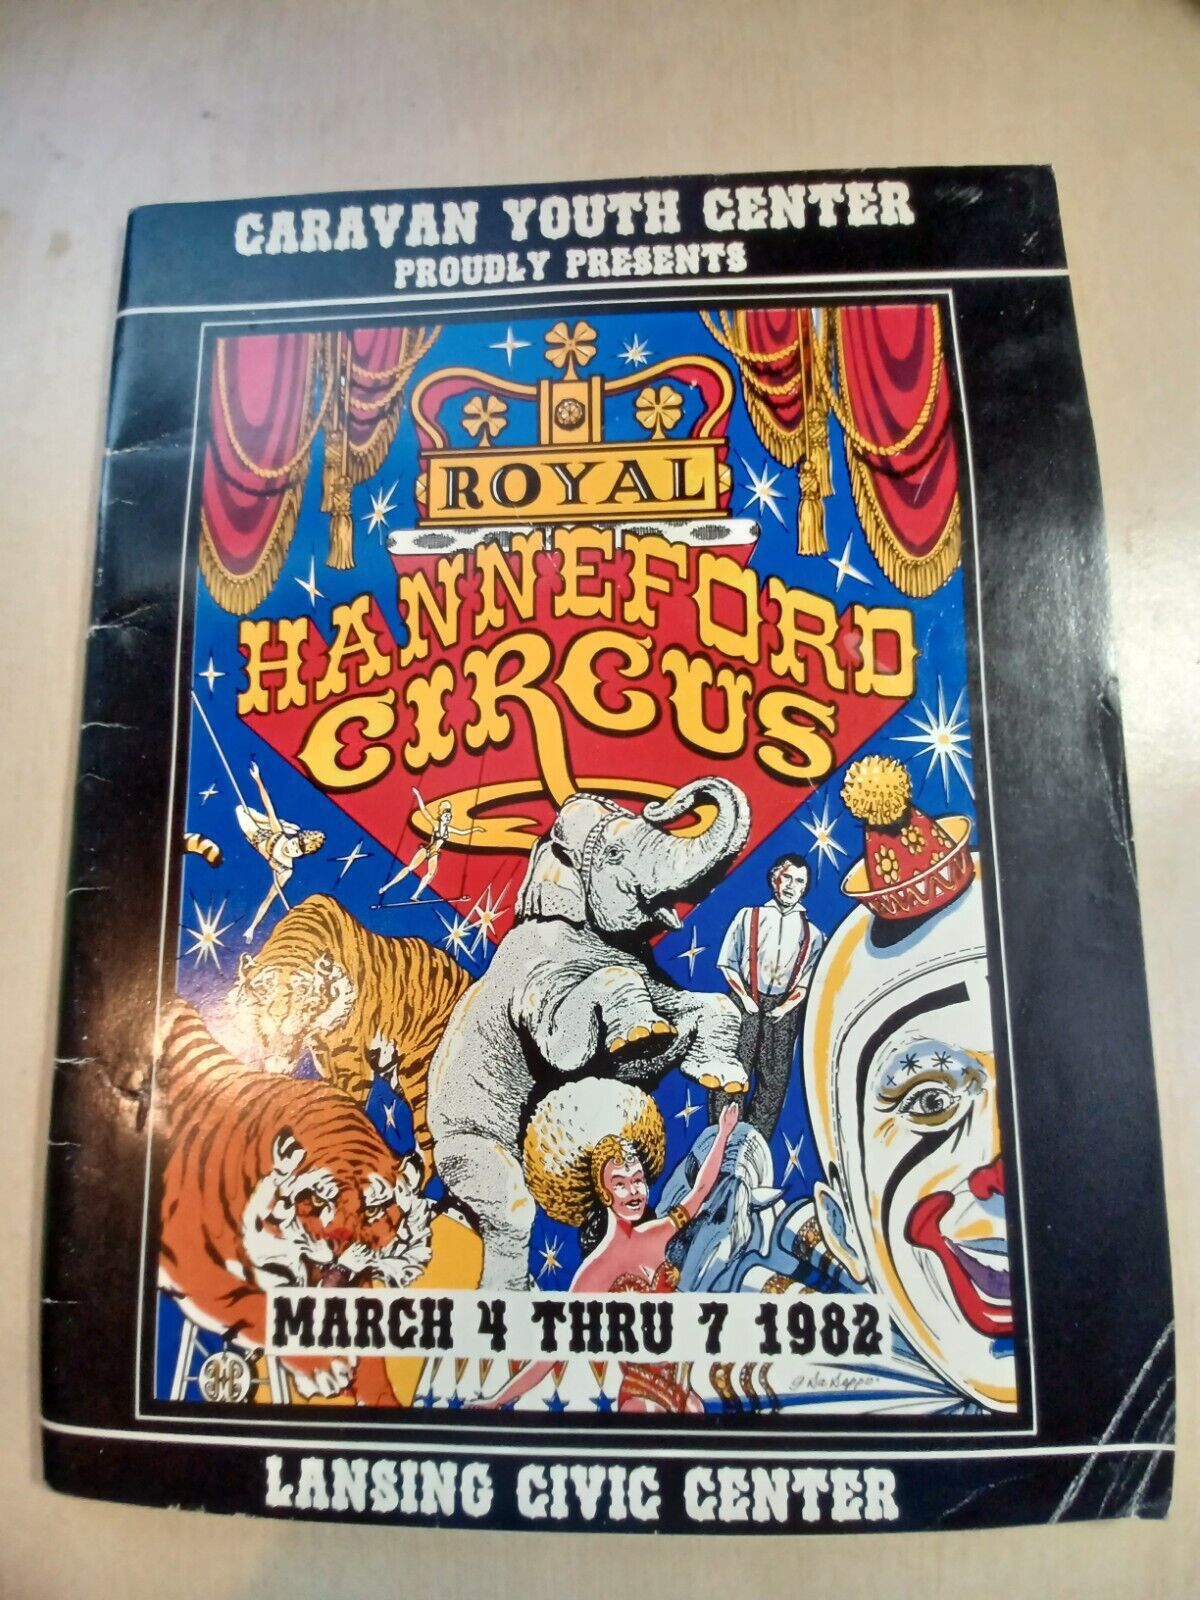 Caravan Youth Center - Royal Hanneford Circus Coloring Book and Program 1982 